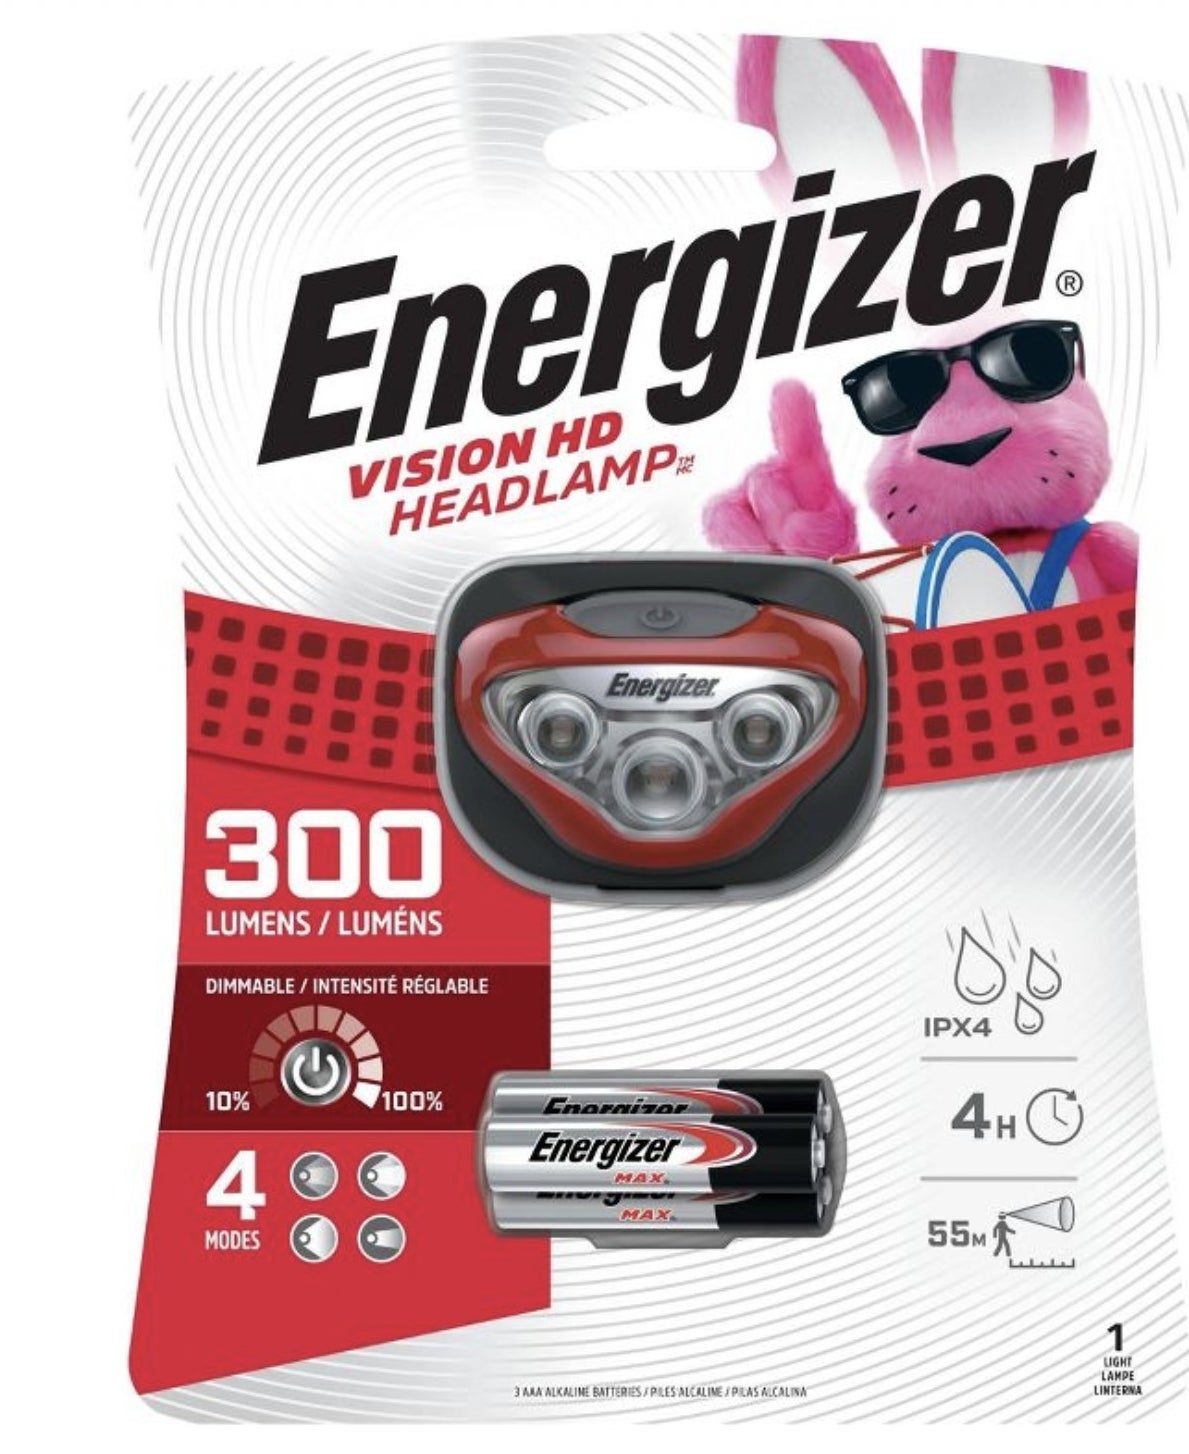 A headlamp in its packaging